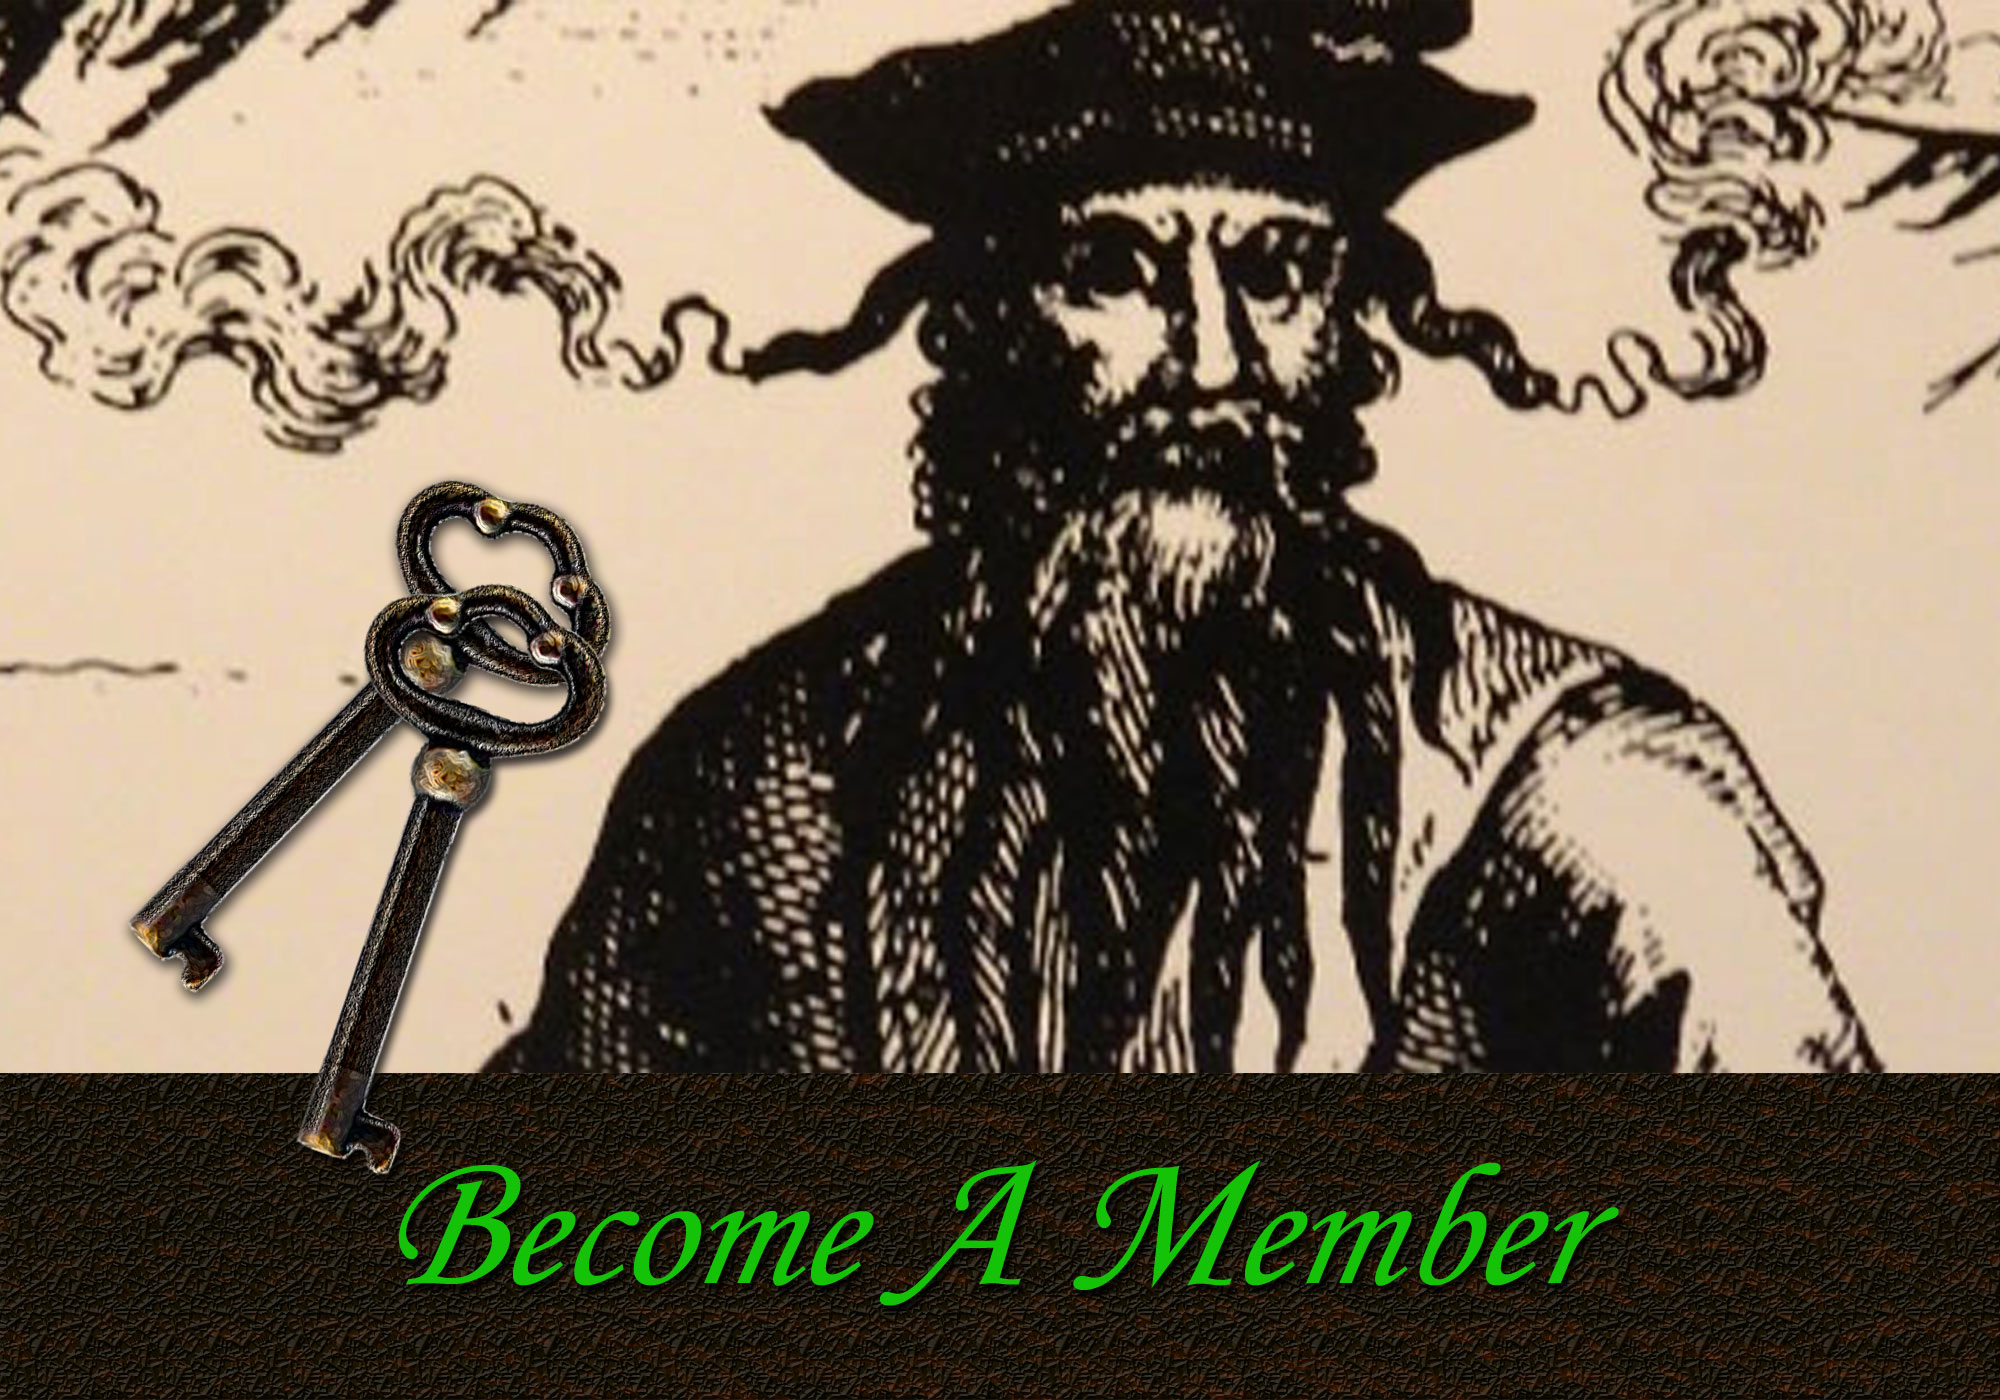 Become a member of the Historical Society of Topsail Island